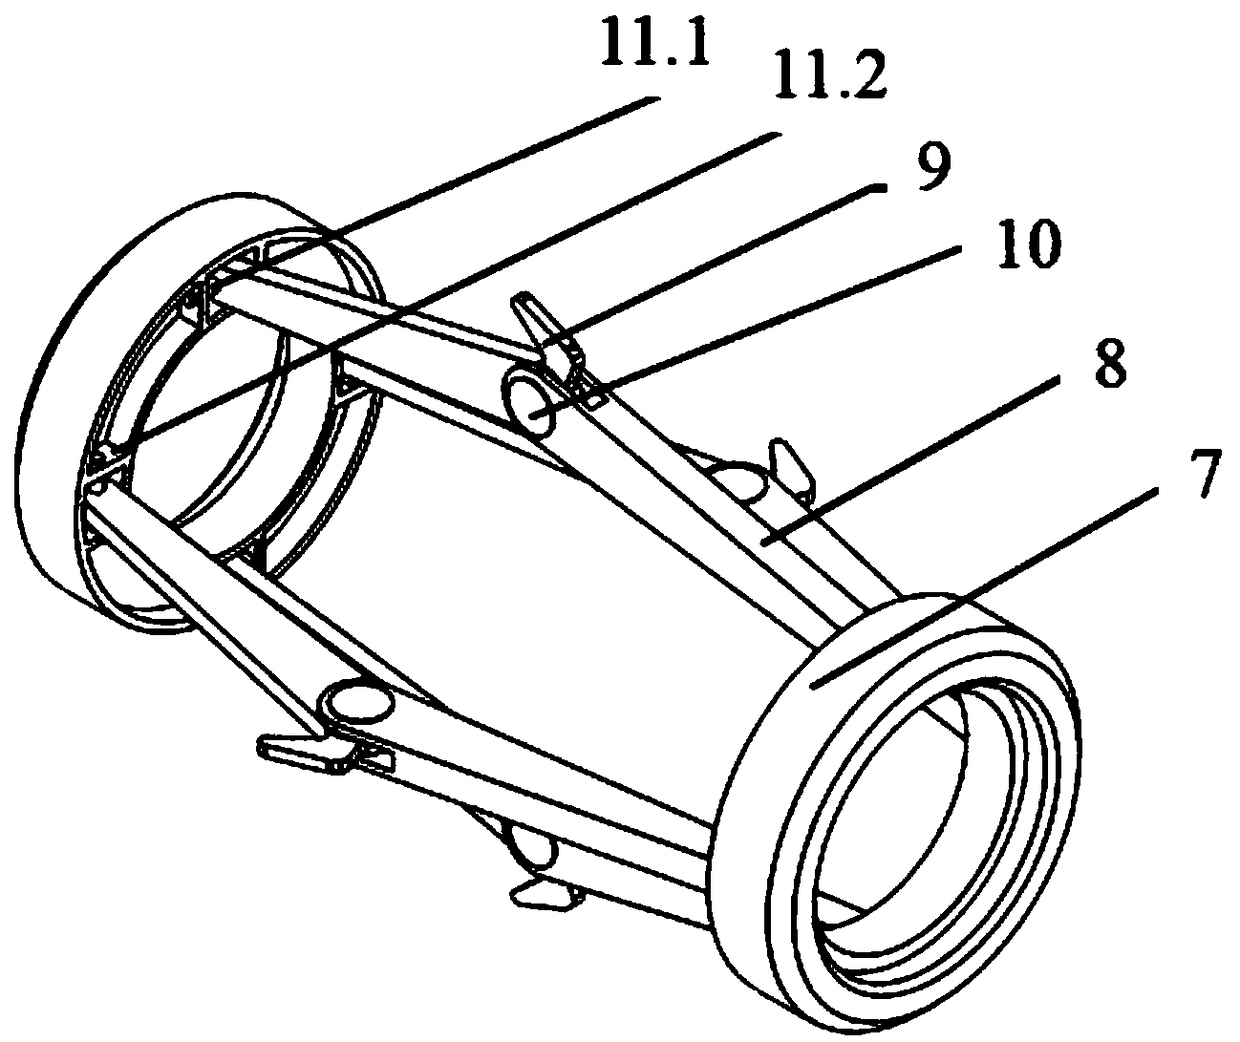 Staged fracturing slide sleeve opening-closing device